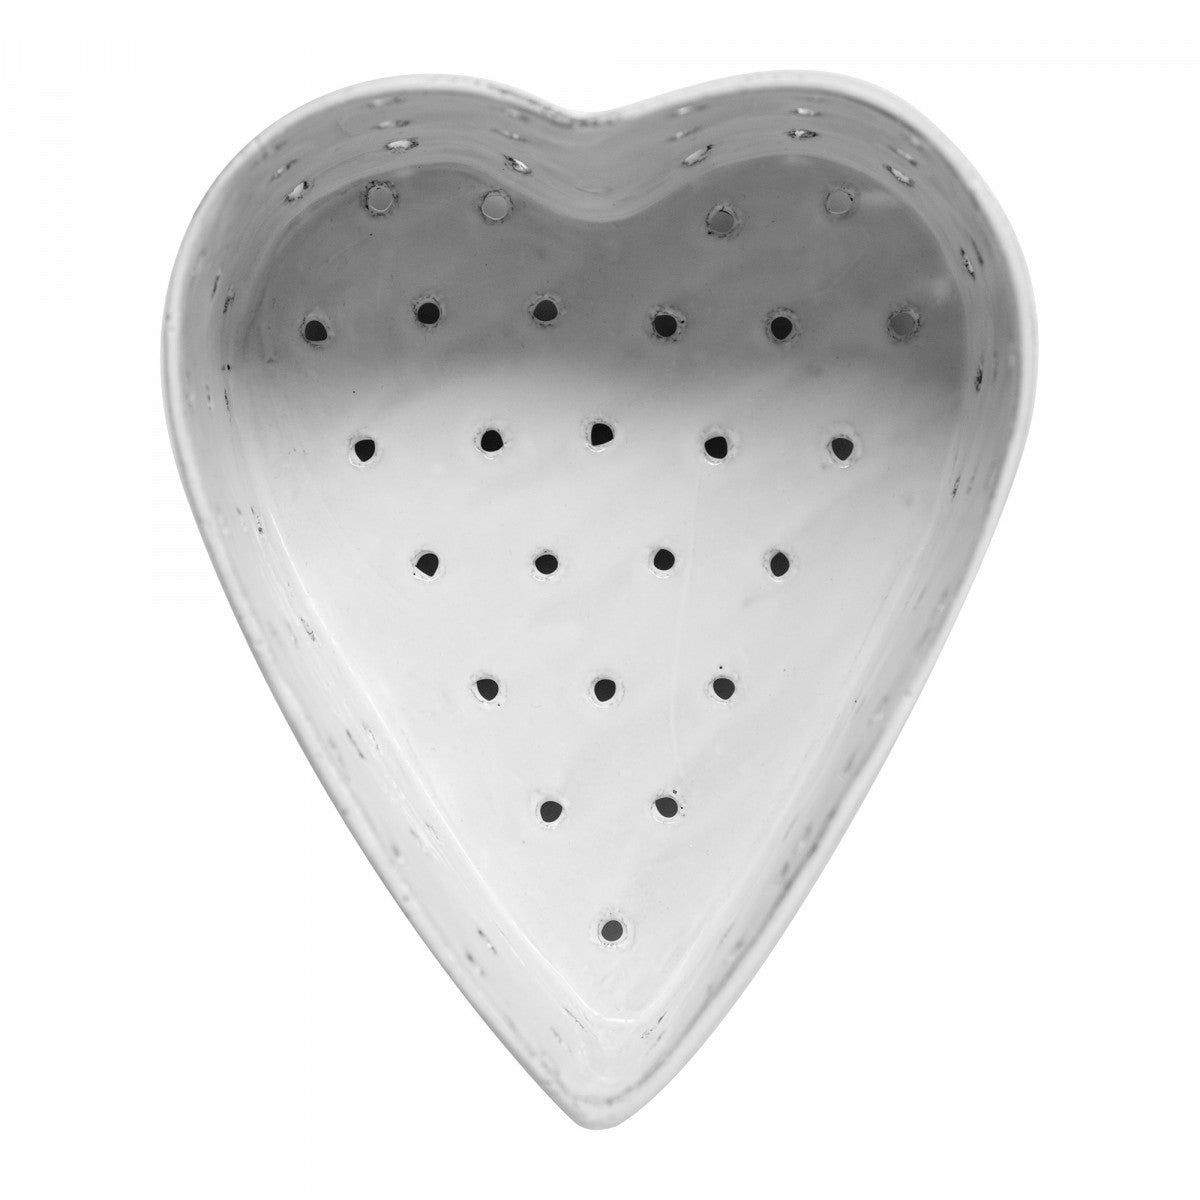 Heart Dish With Holes